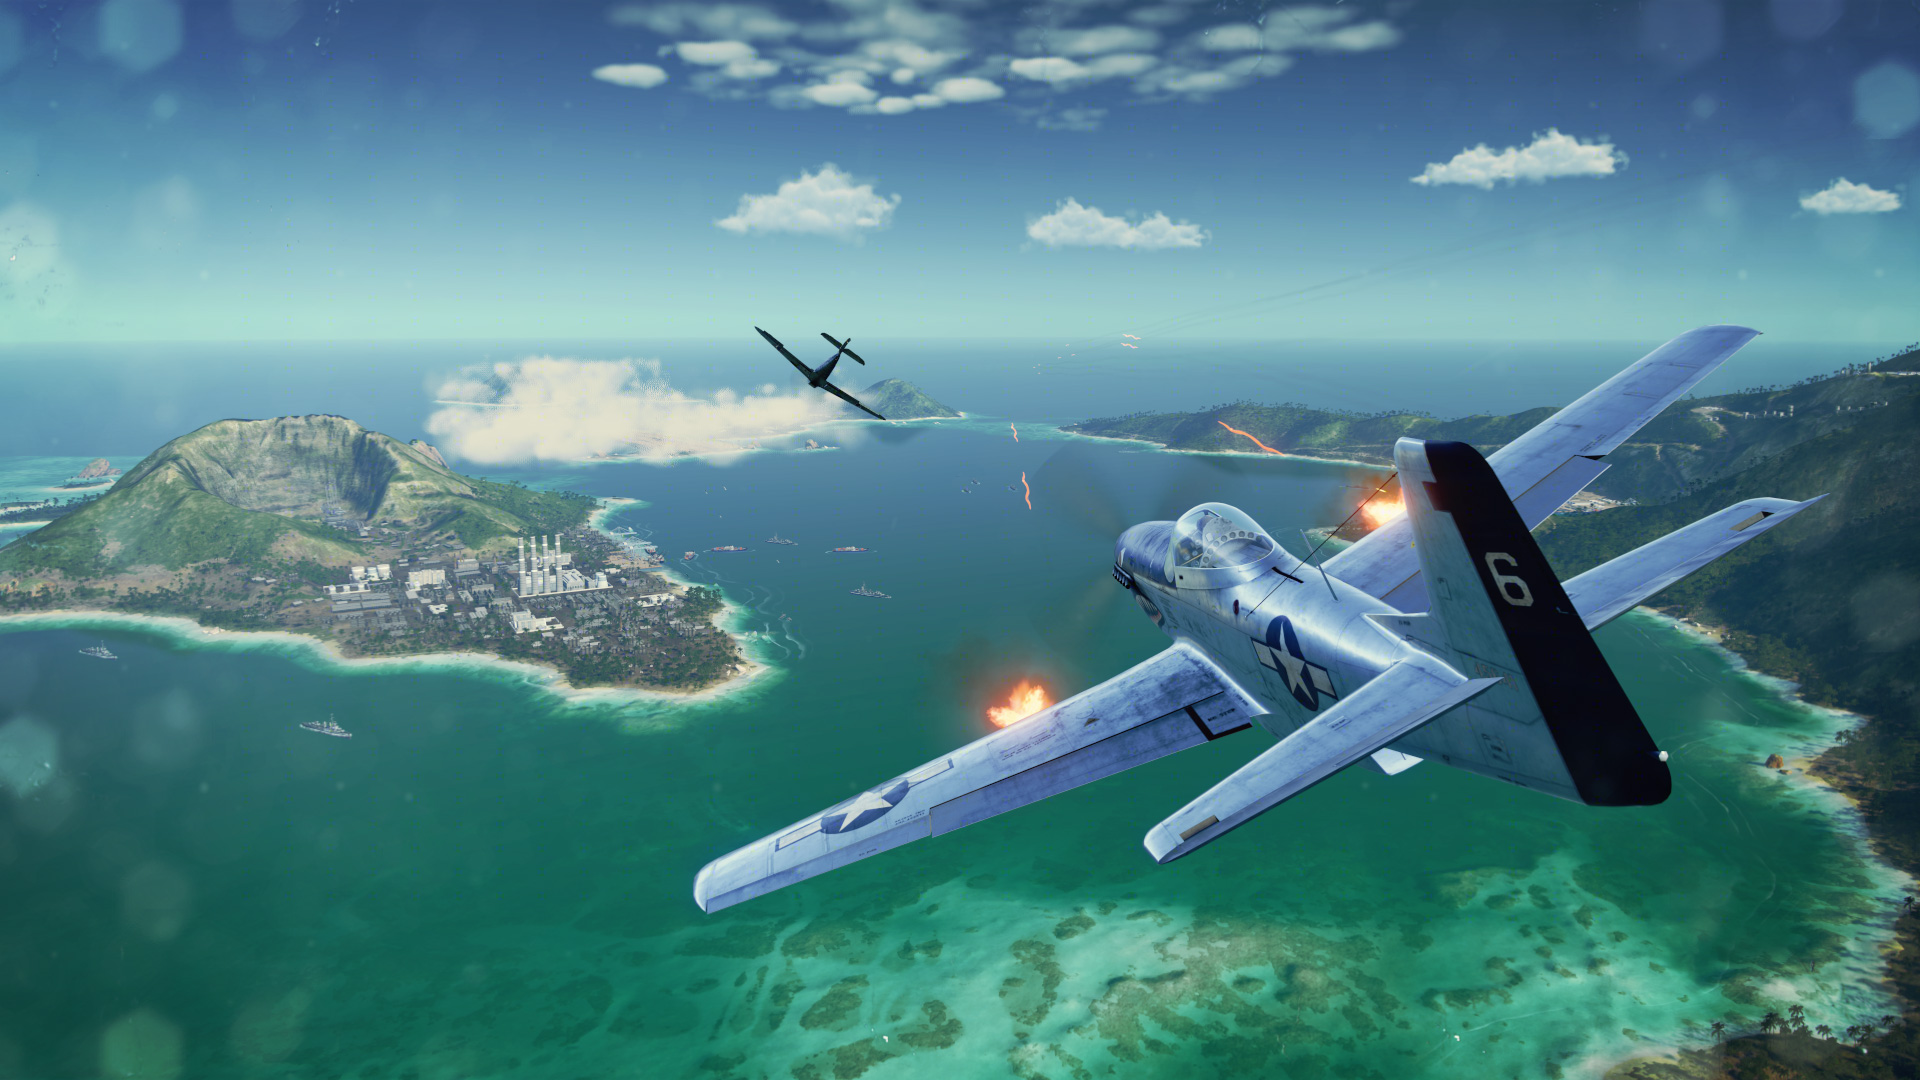 Best WW2 games: World of Warplanes. Image shows two plans flying through the sky over the ocean.